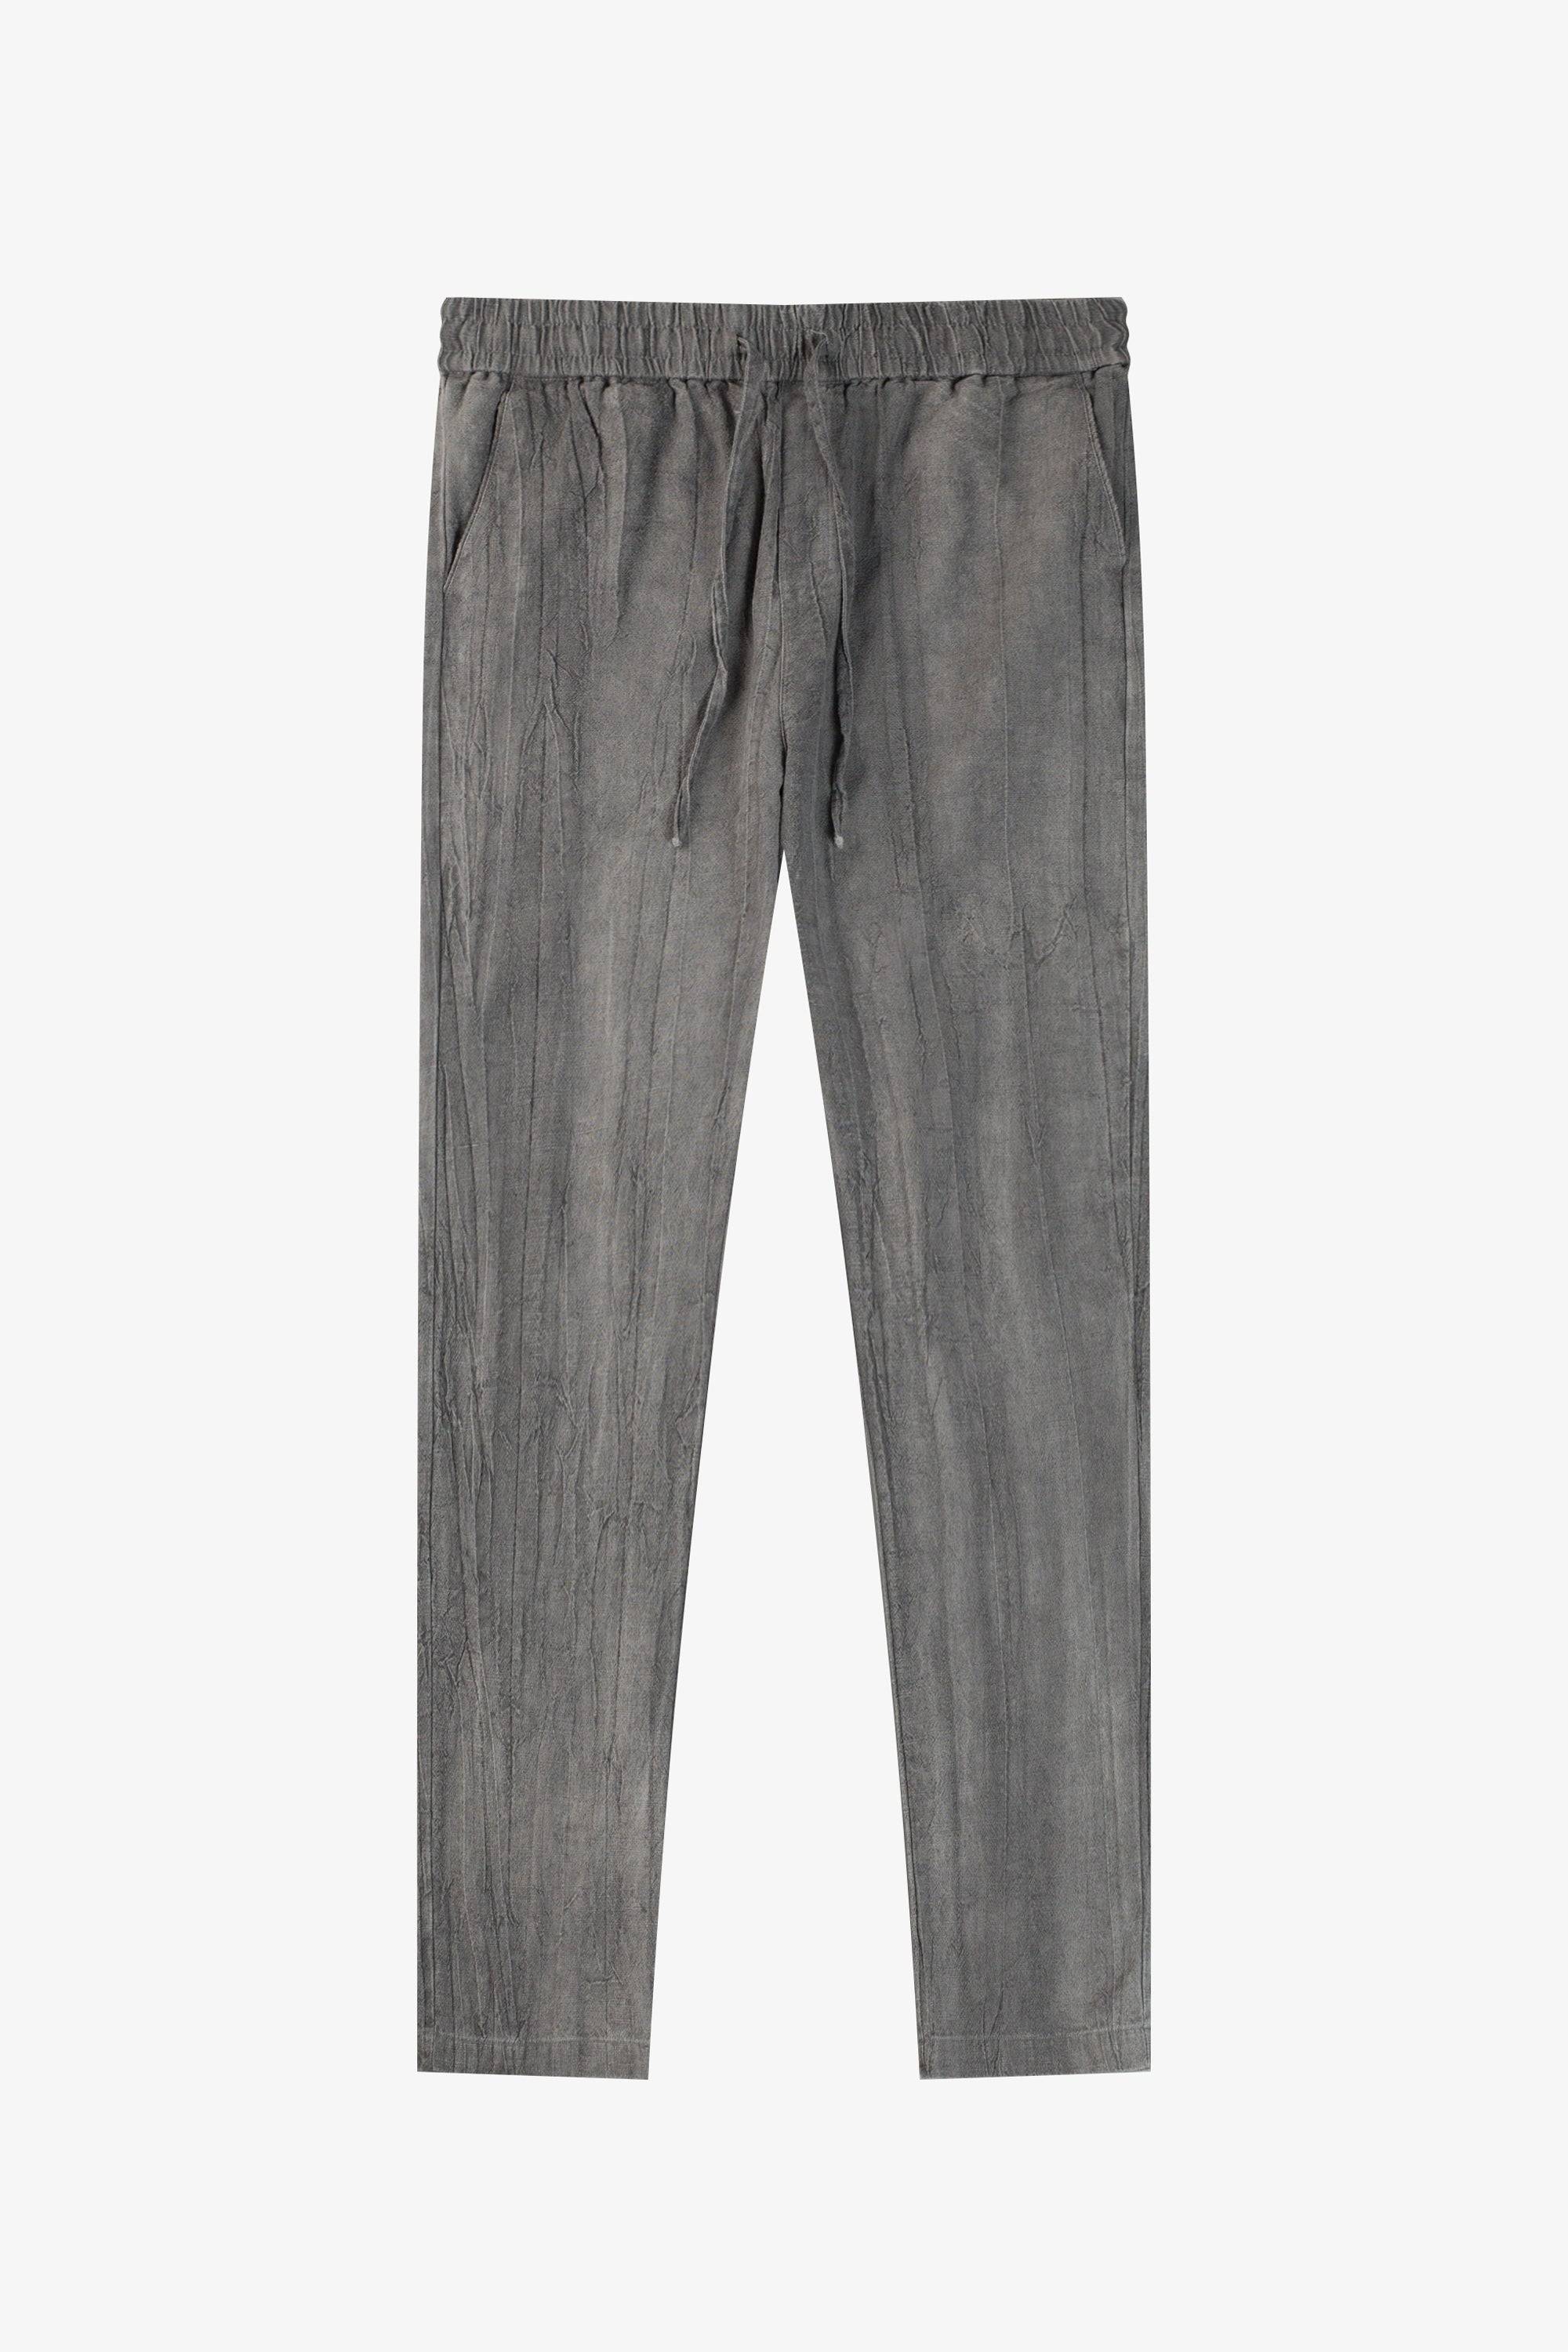 a pair of grey pants with a drawstring